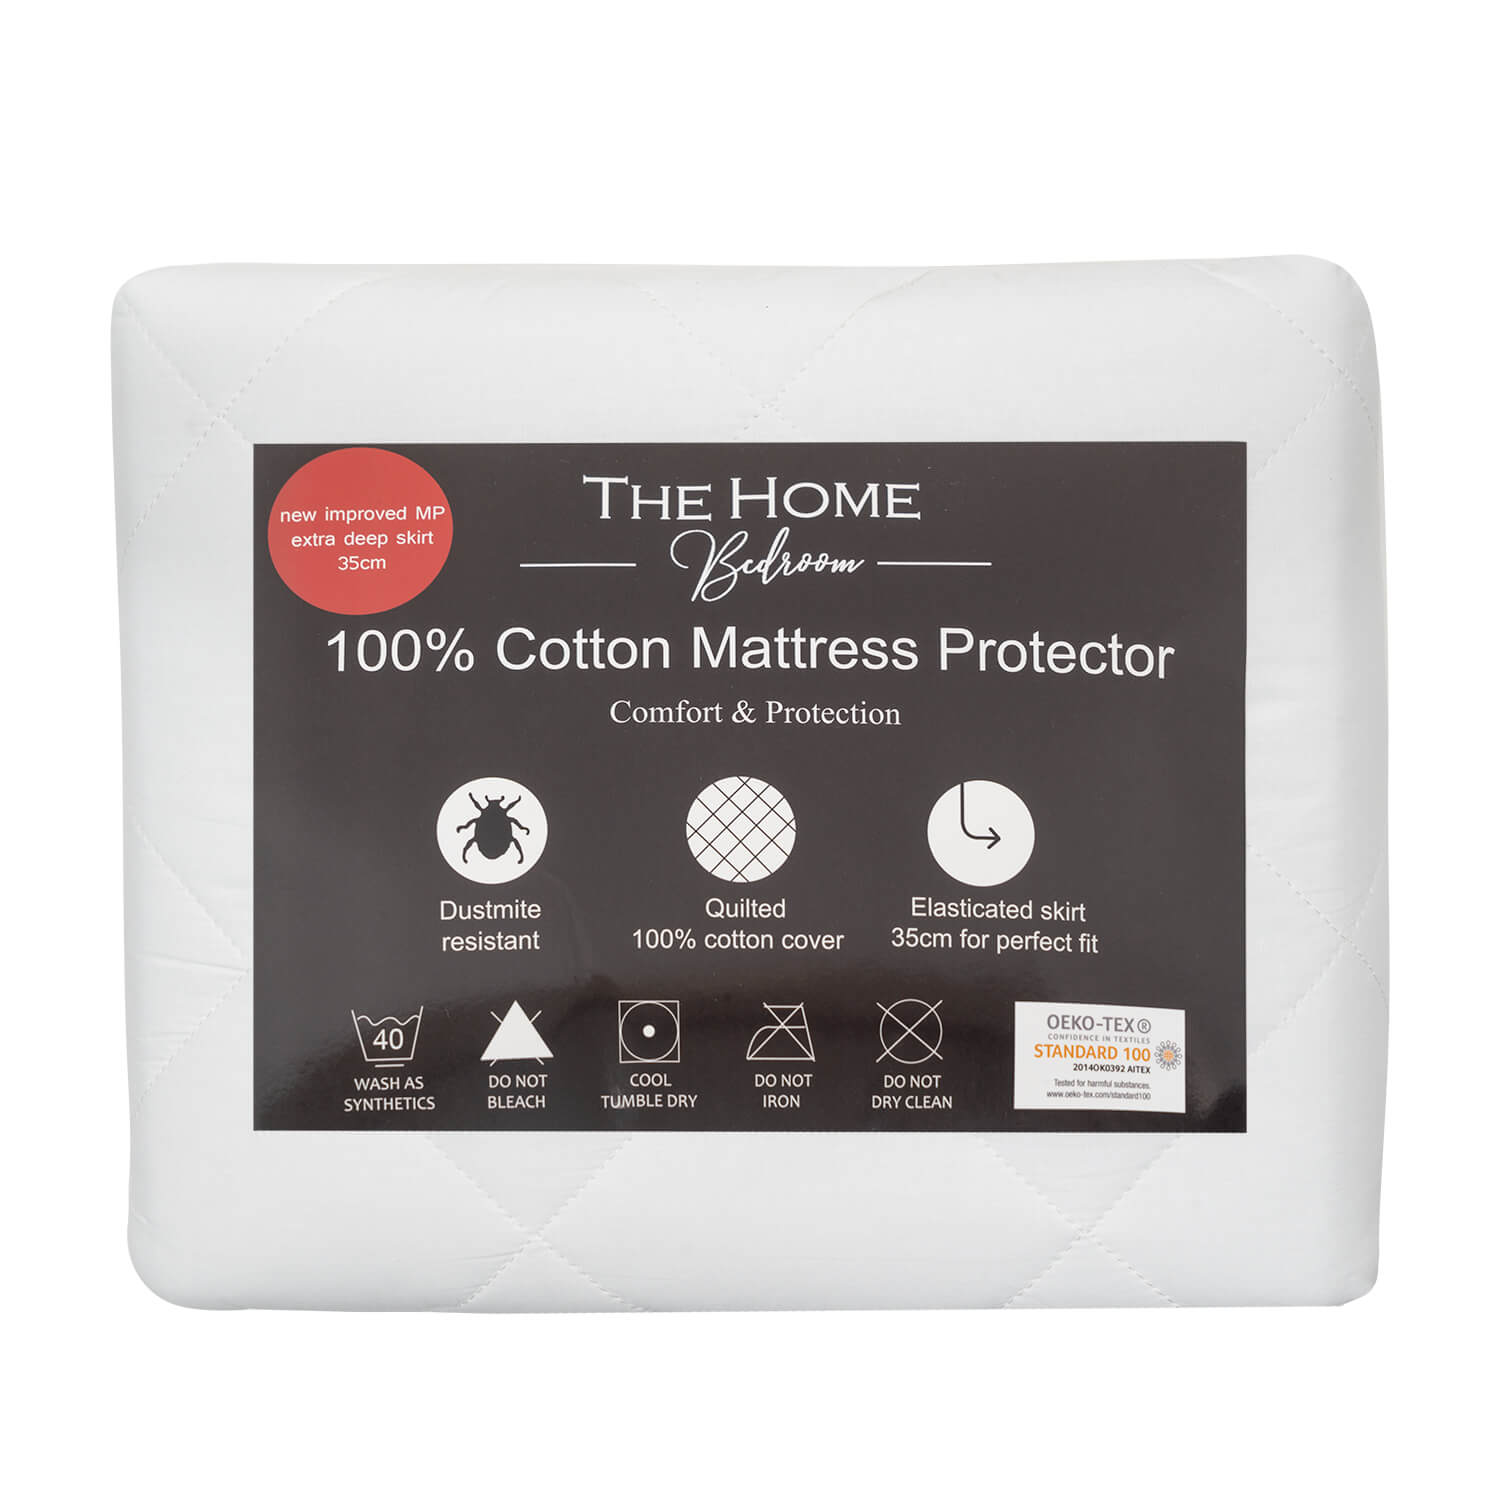 The Home Bedroom Cotton Mattress Protector 1 Shaws Department Stores